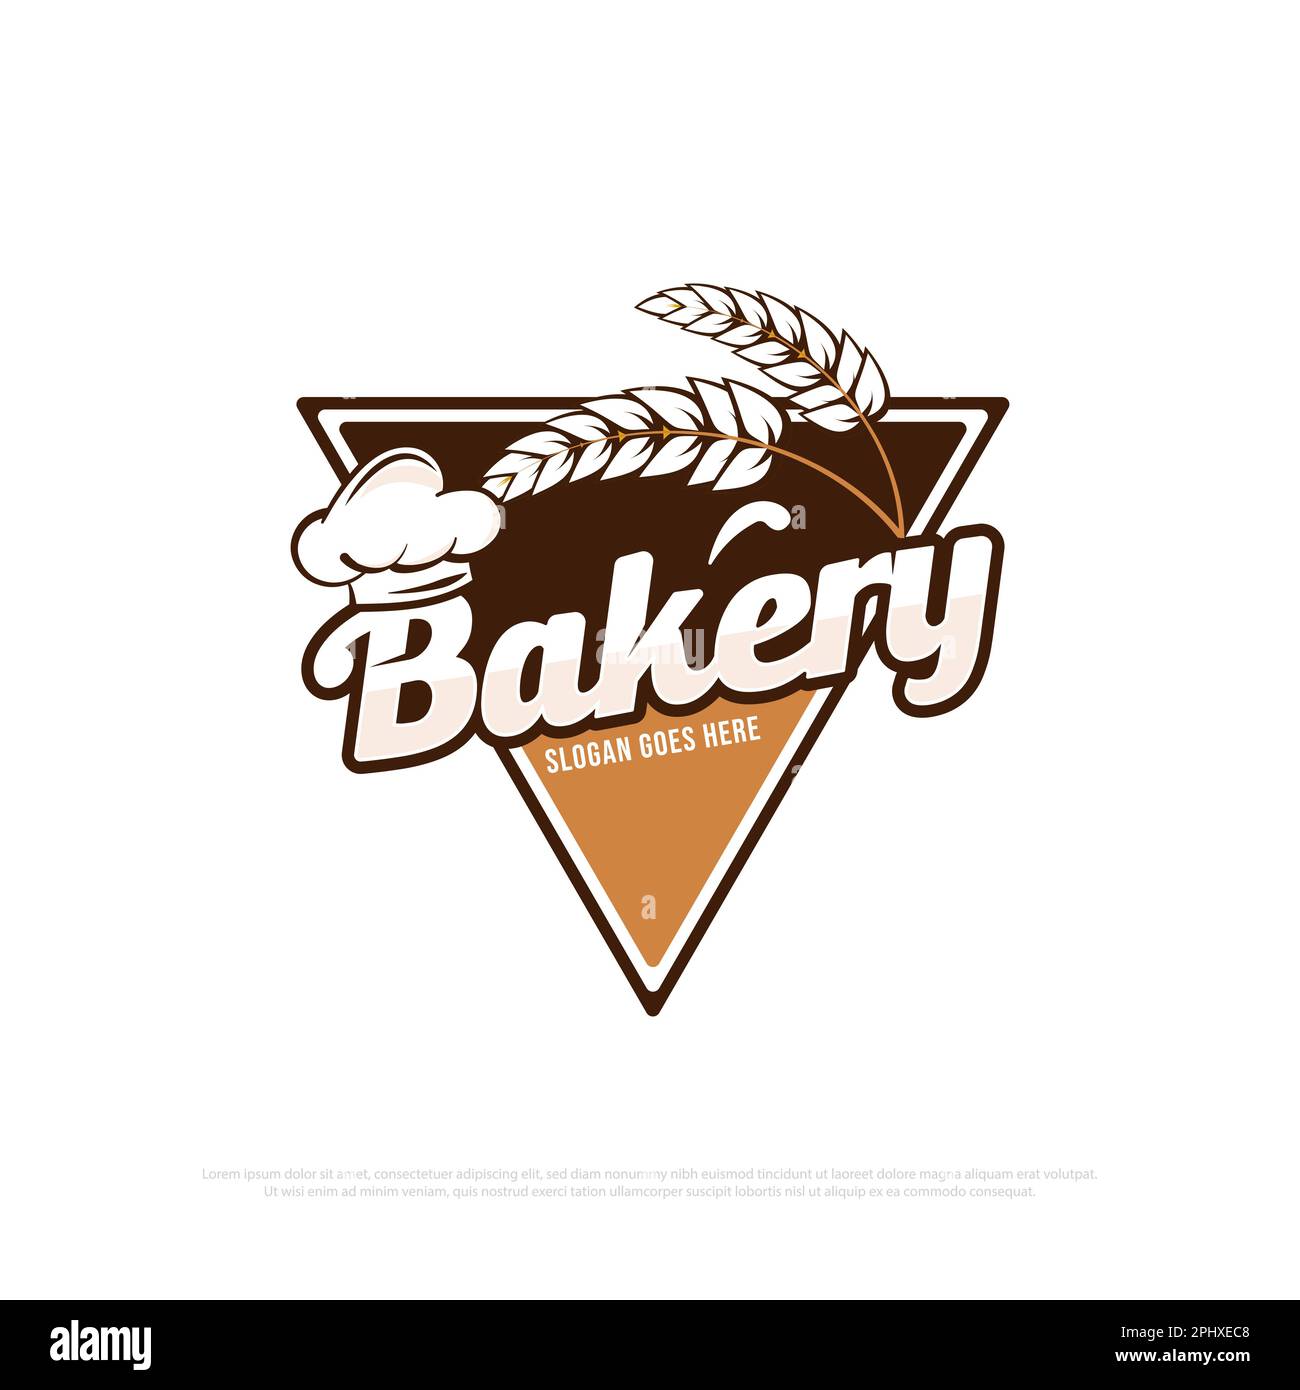 Bakery logo design vector with triangle shape, best for bread shop, food store logo emblem template Stock Vector